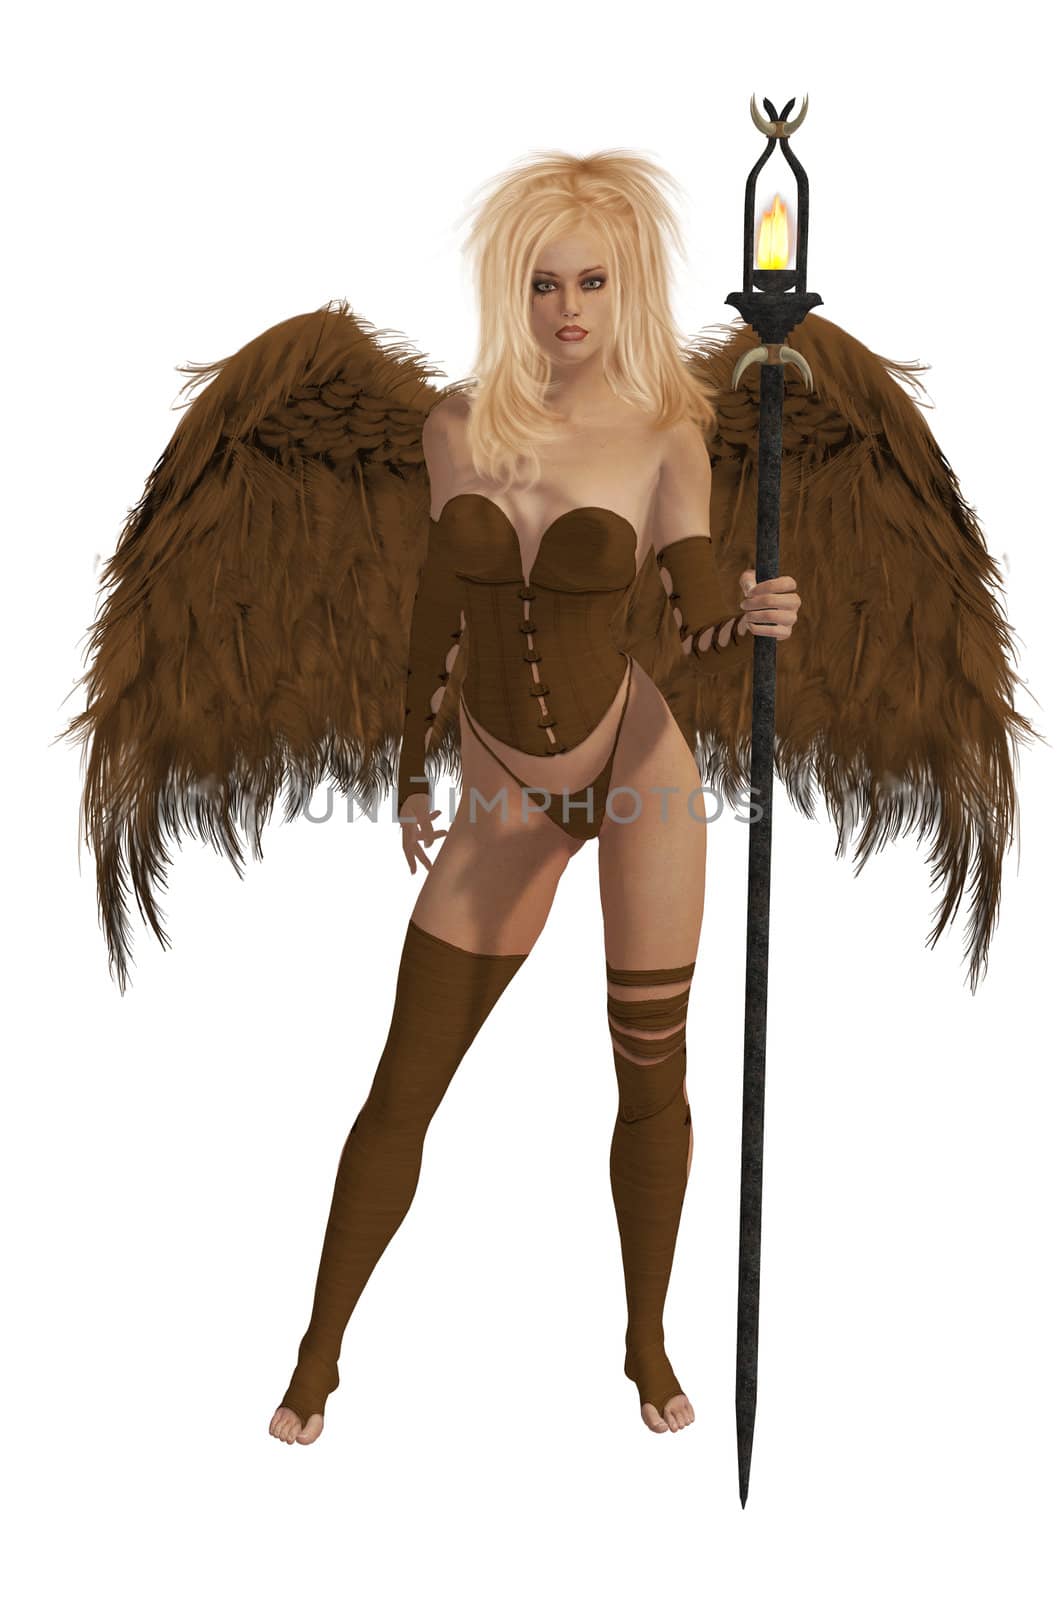 Brown winged angel with blonde hair standing holding a torch